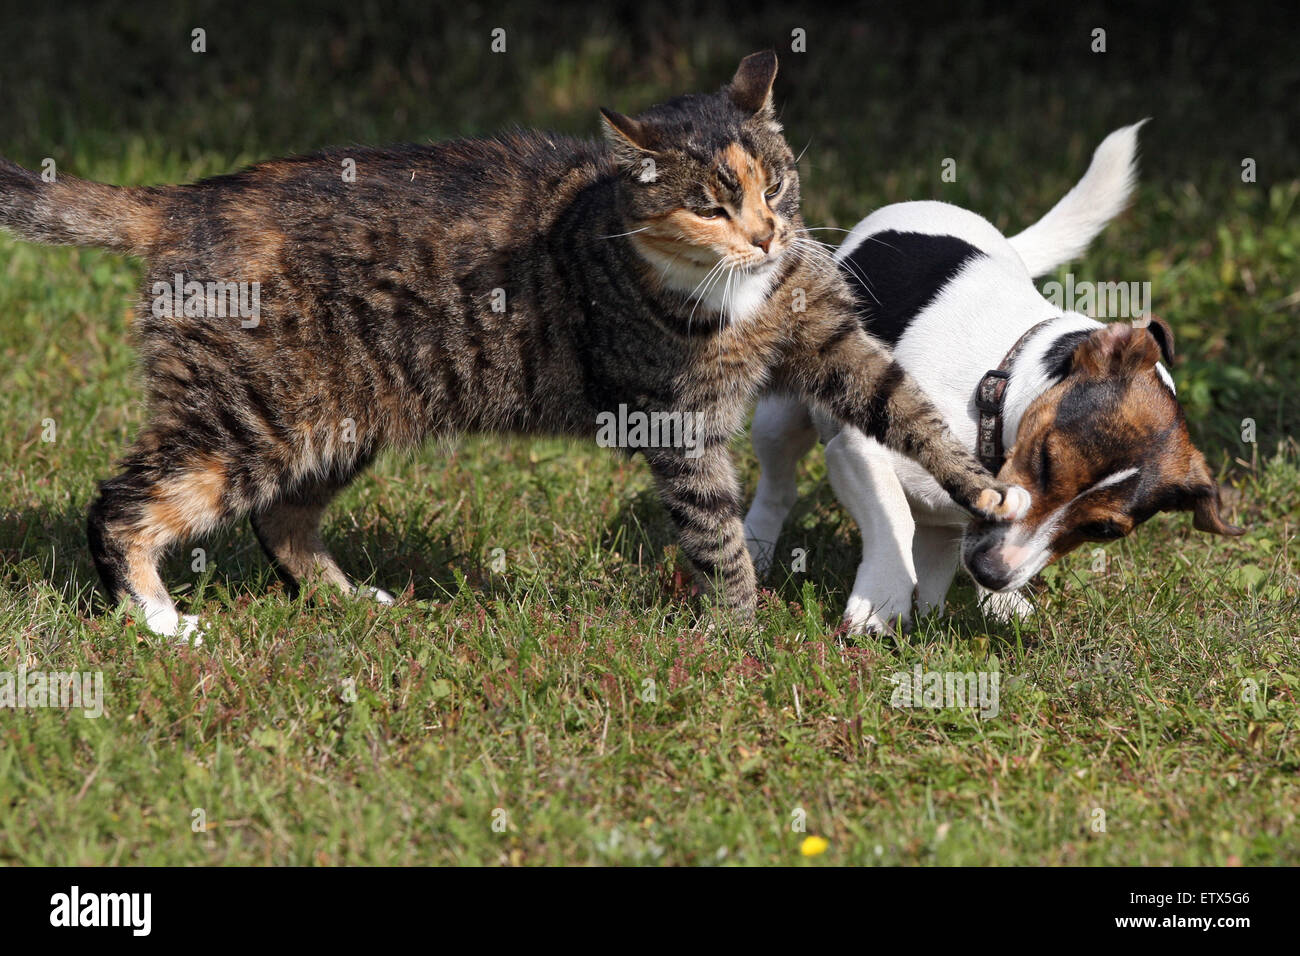 Görlsdorf, Germany, Domestic Cat is a Jack Russell Terrier a paw swipe at the muzzle Stock Photo